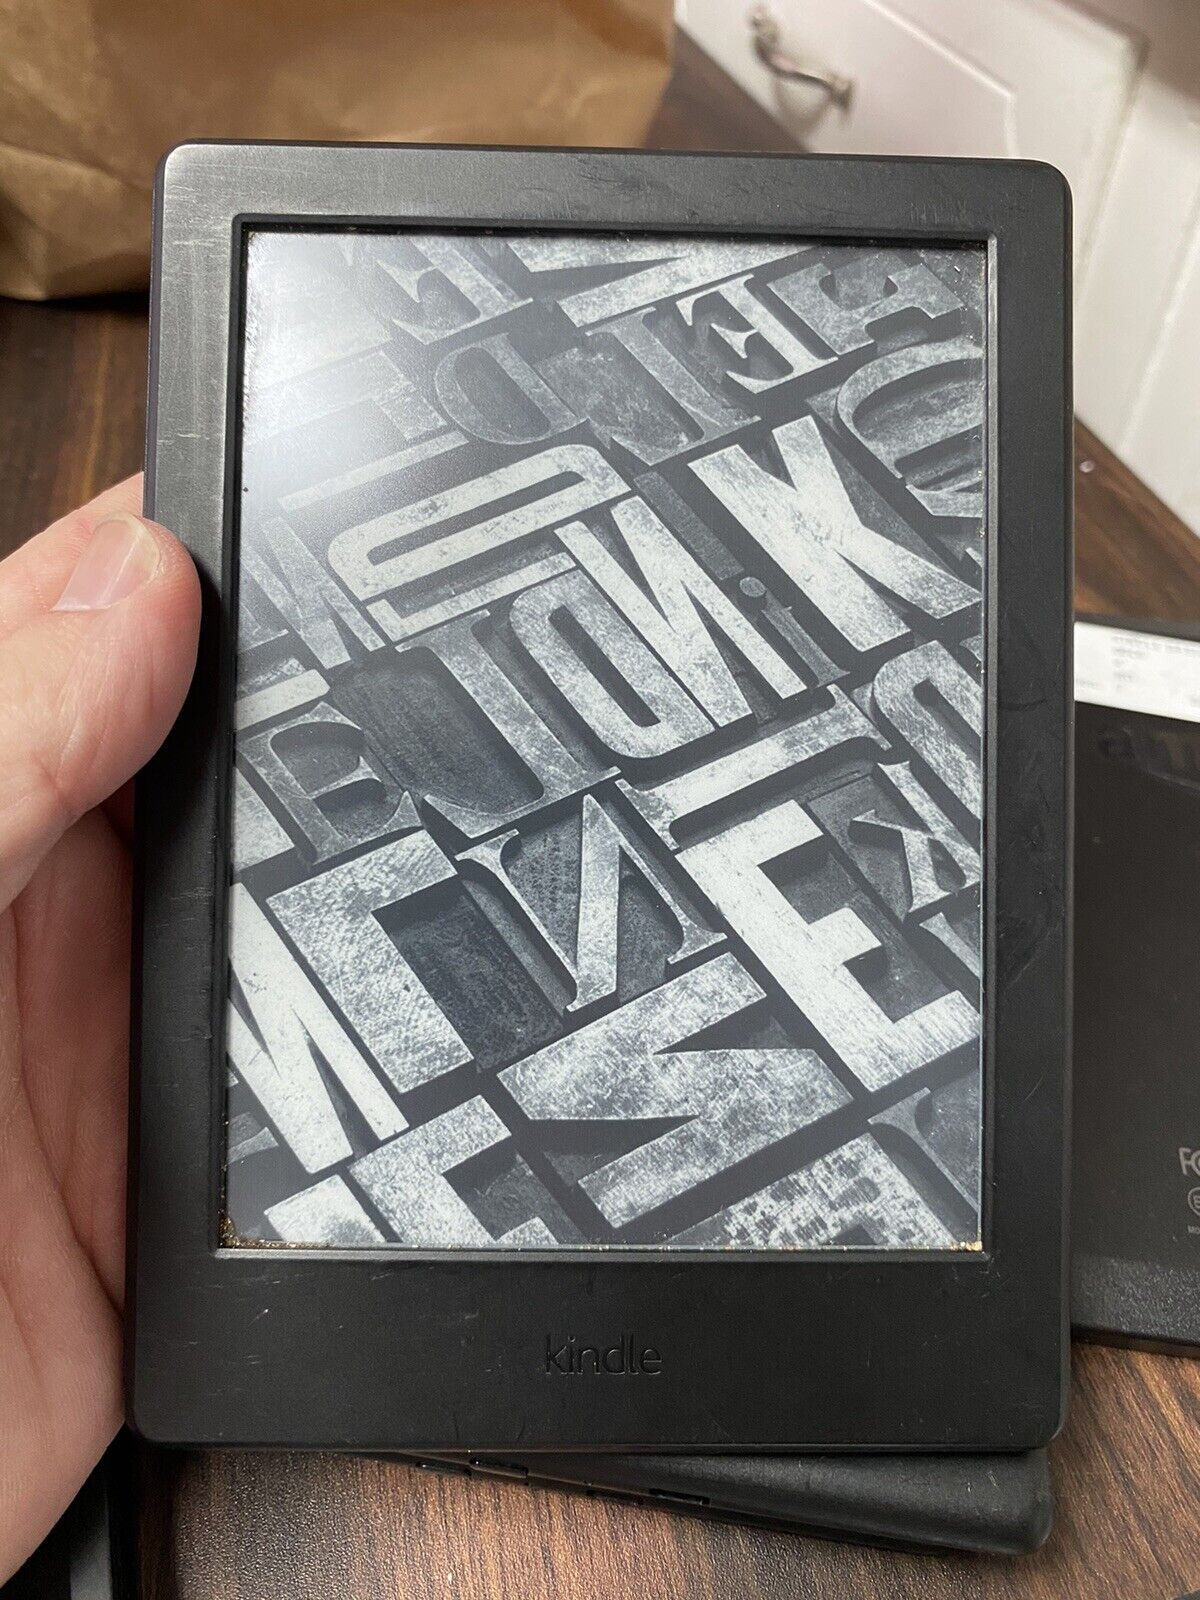 Amazon Kindle 8th Generation | Model SY69JL | Wi-Fi | TESTED